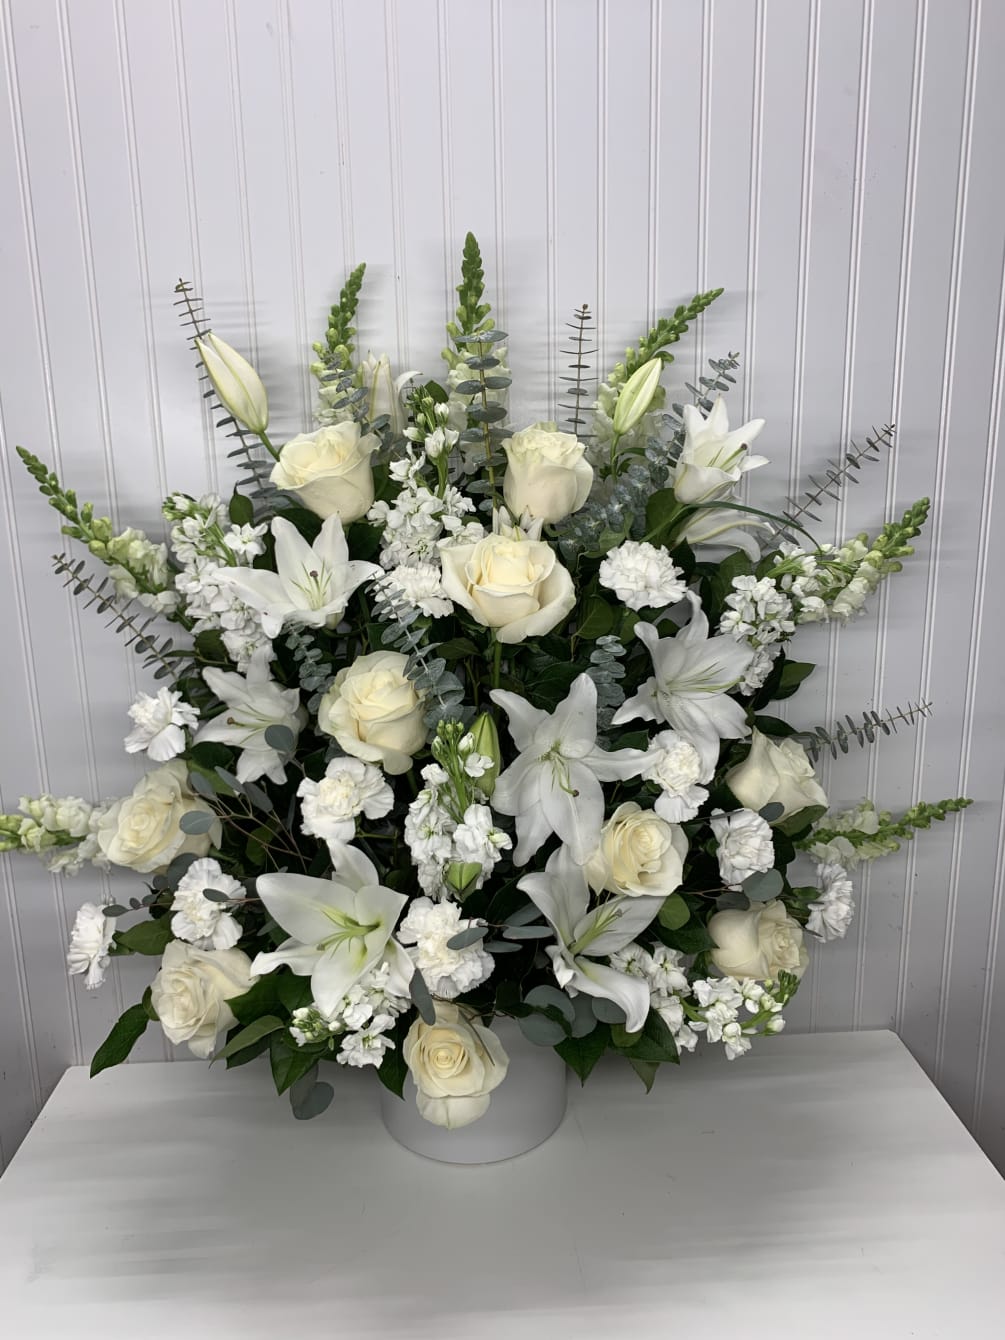 a beautiful floor basket all white whit lilies, roses, stock,  